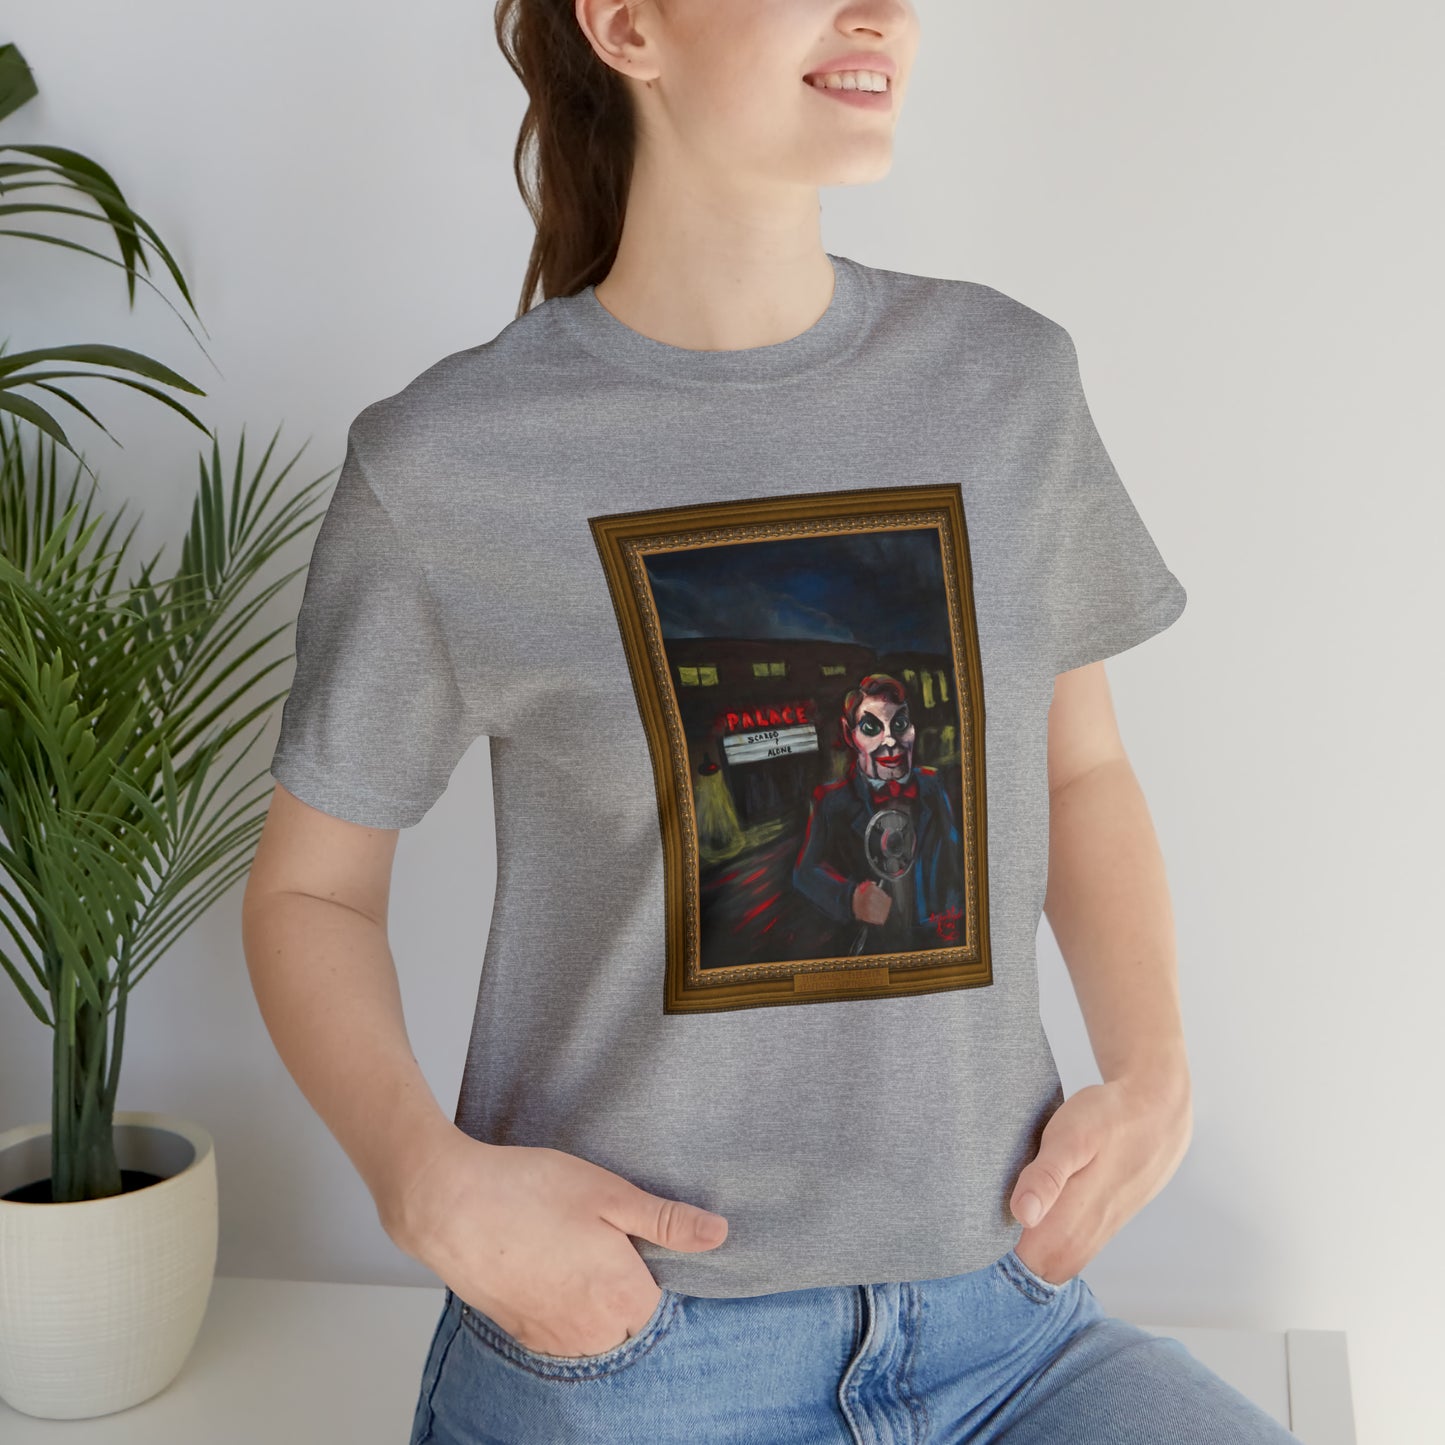 Scared & Alone Richard-Lael's  "The Palace Theater" Unisex Gallery Tee (Single Image)